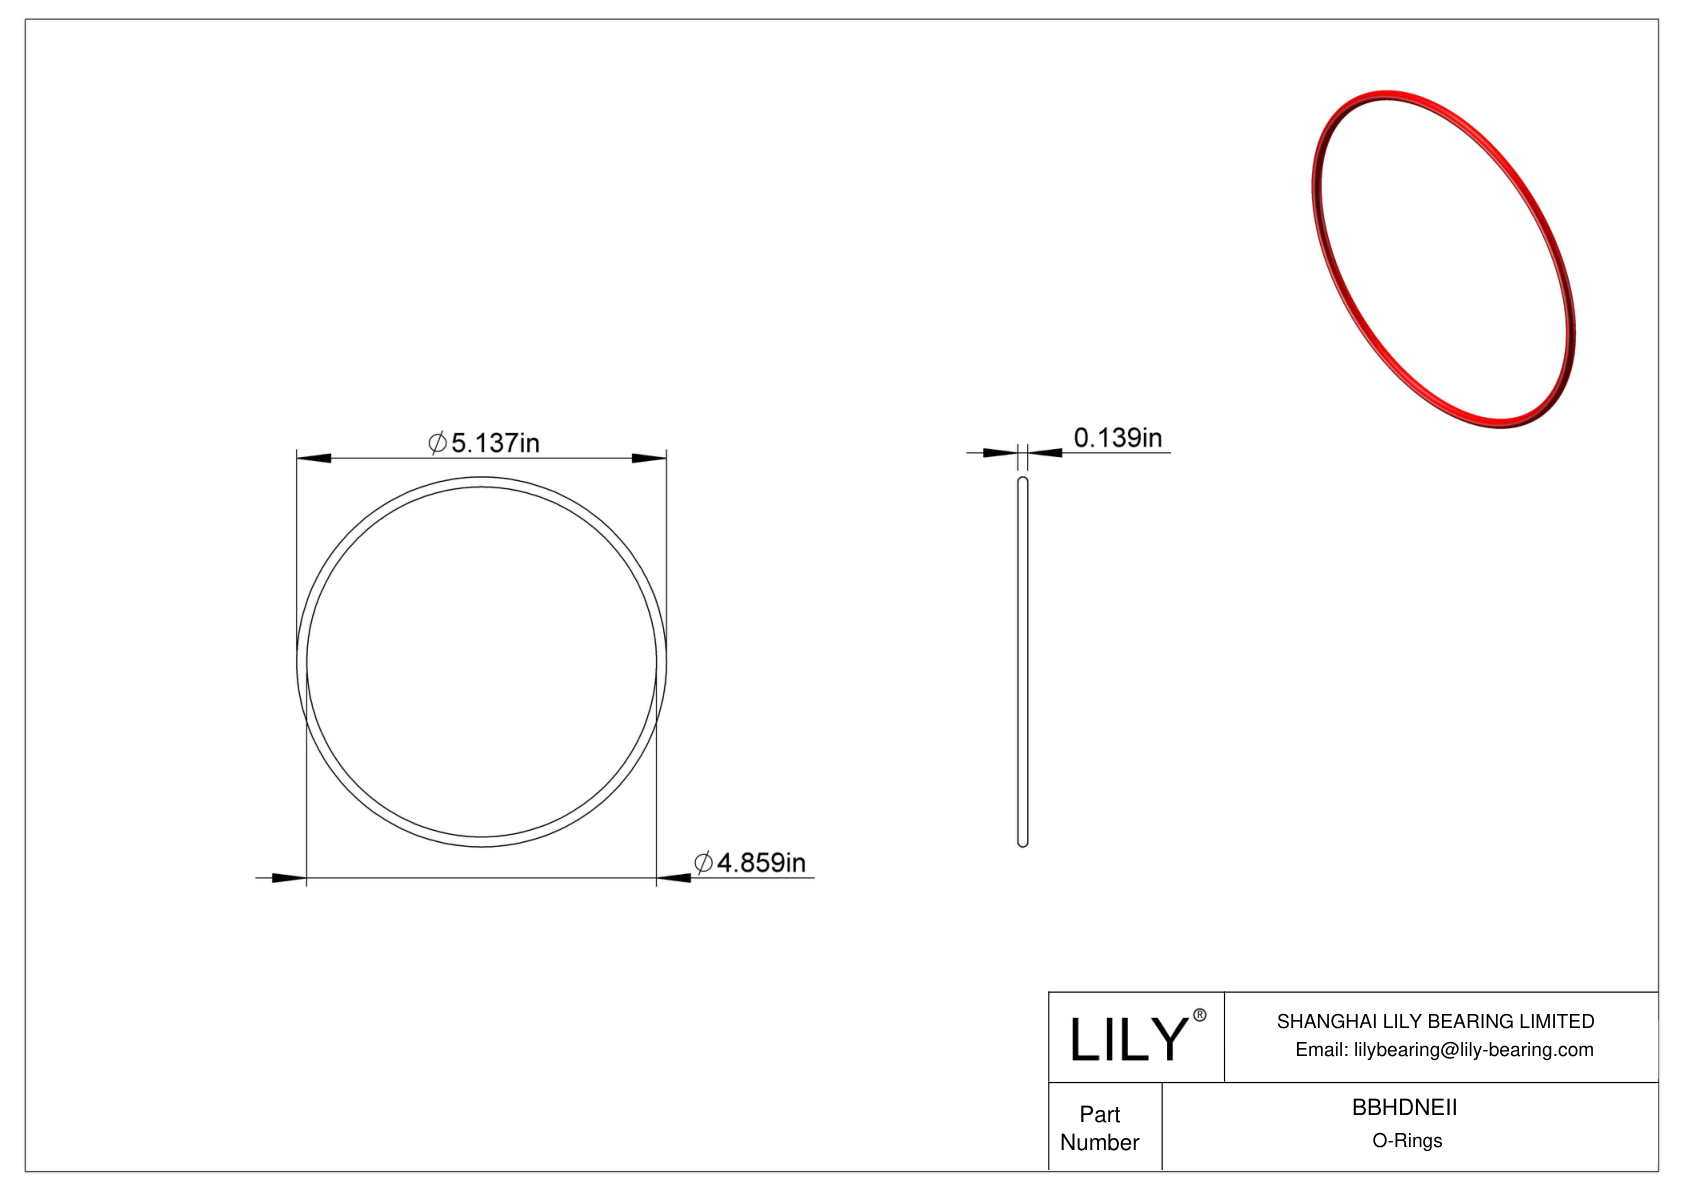 BBHDNEII High Temperature O-Rings Round cad drawing